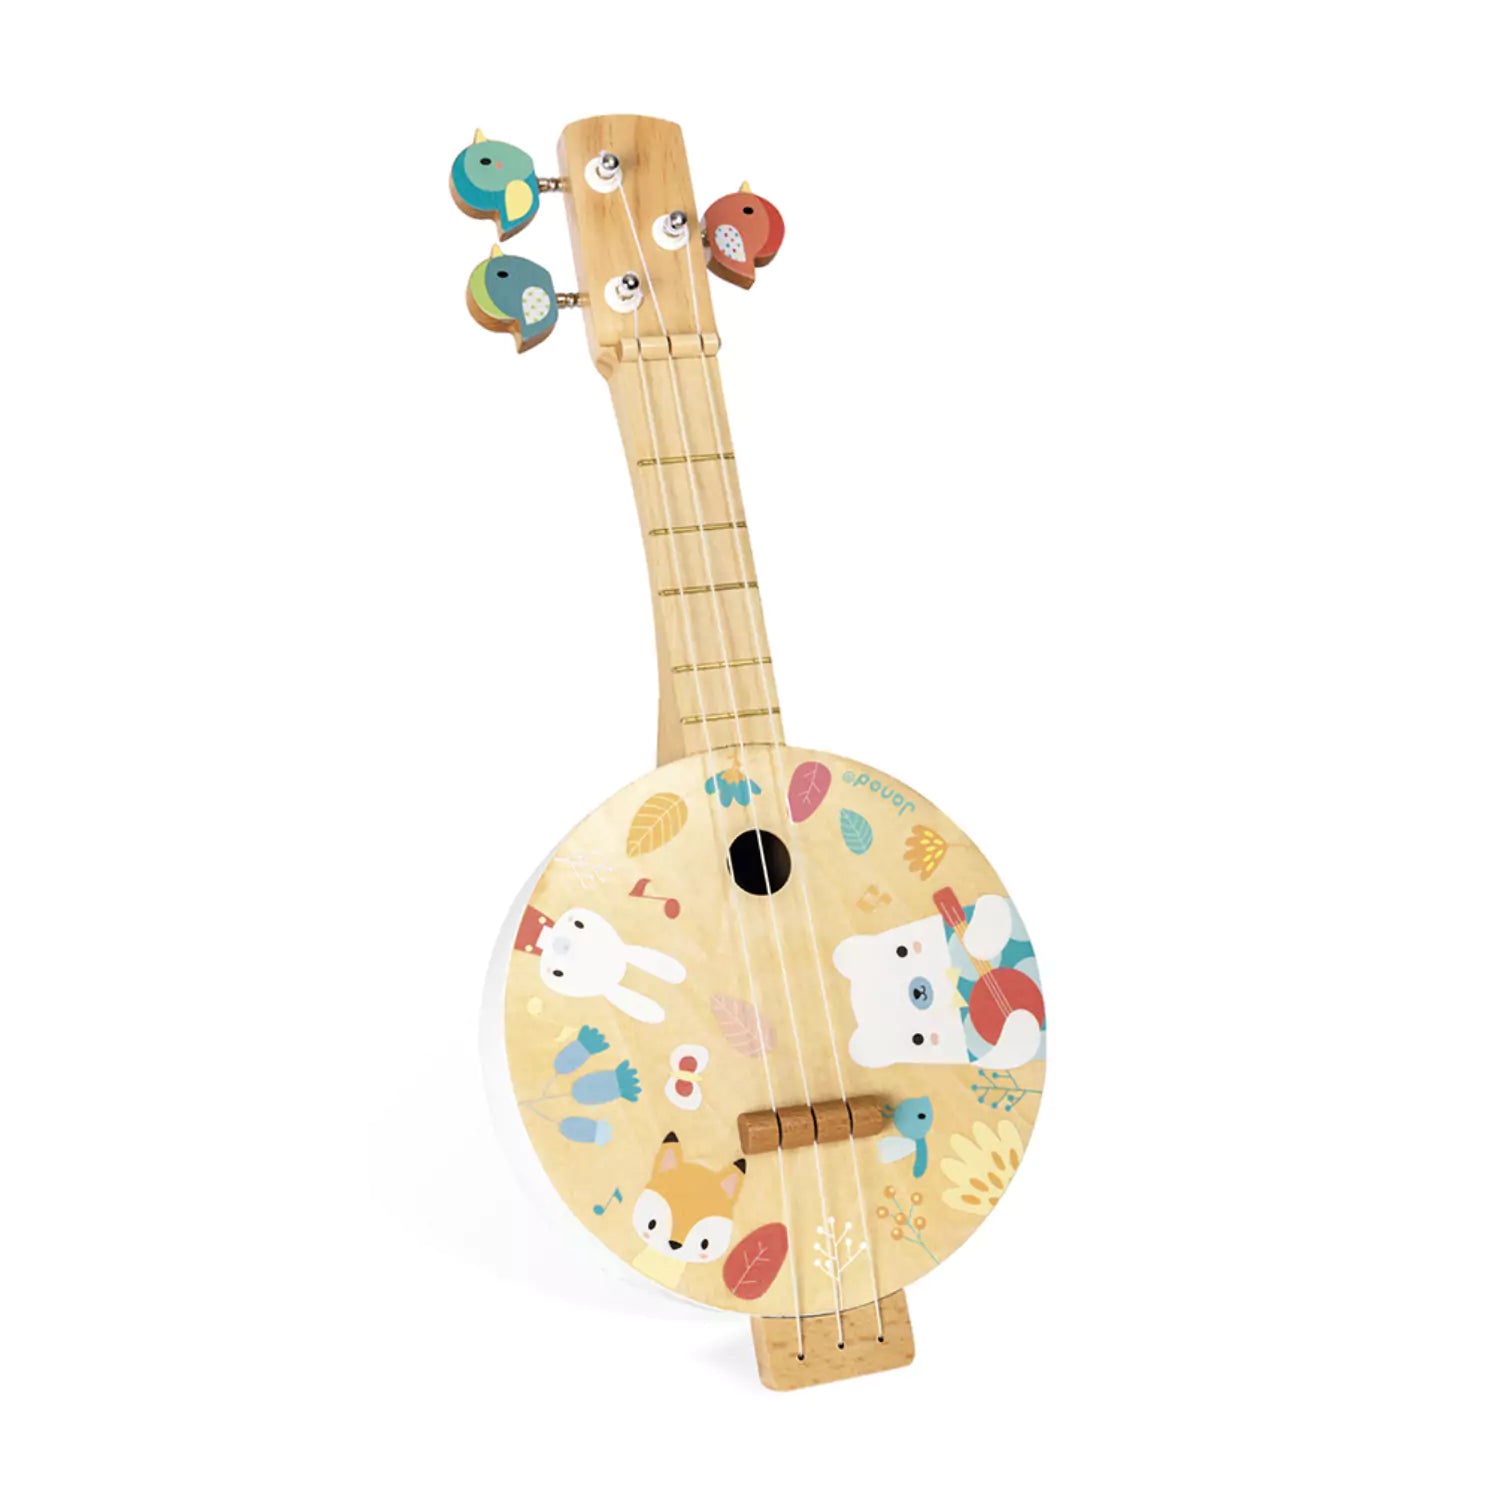 An image of Wooden Forest Pure Banjo Musical Instrument Toy | Buy Now